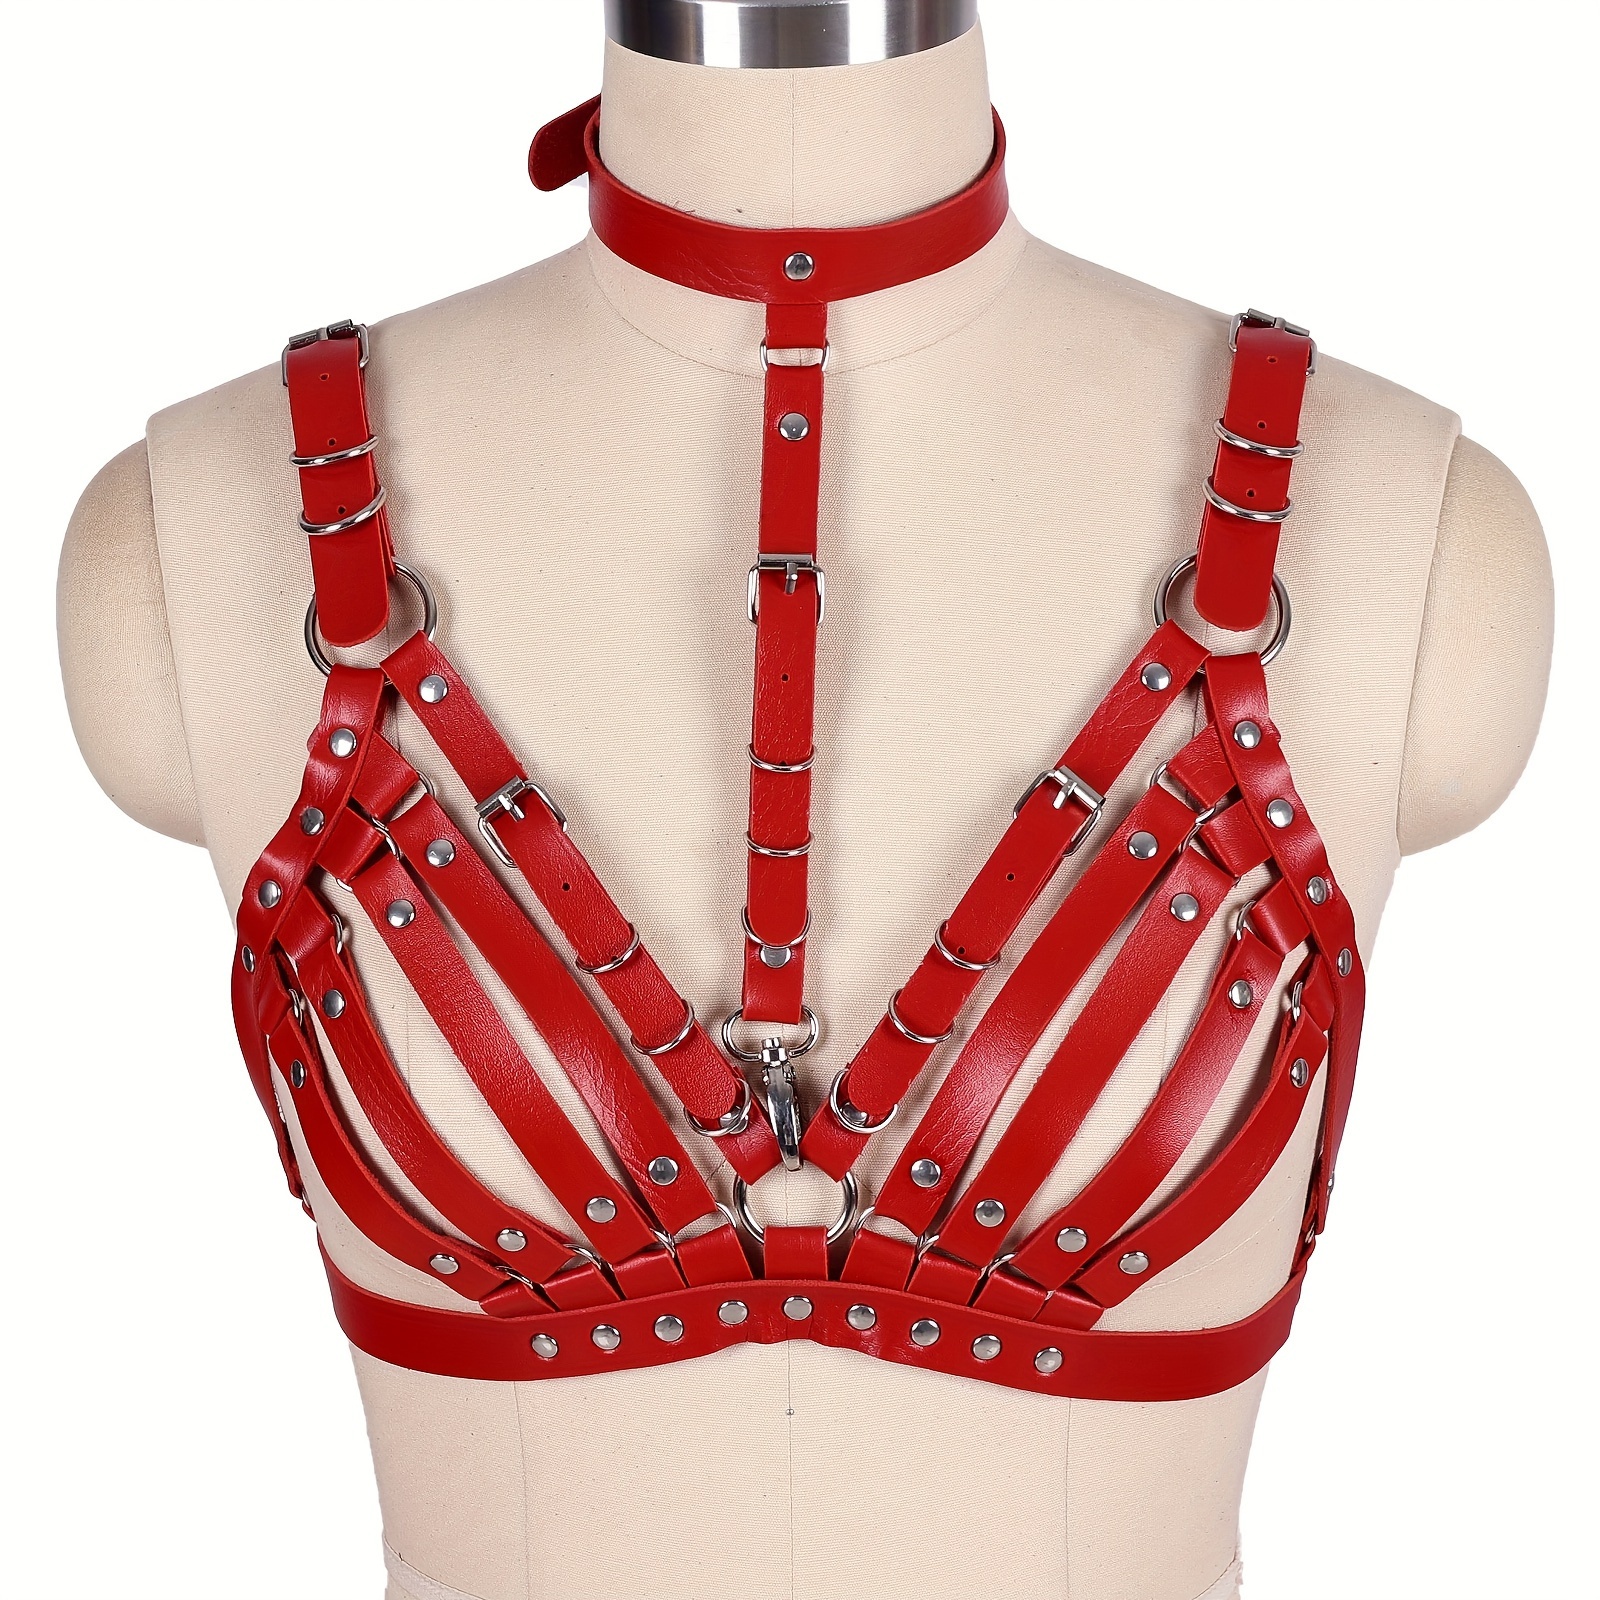 Leather Harness Cage Bra